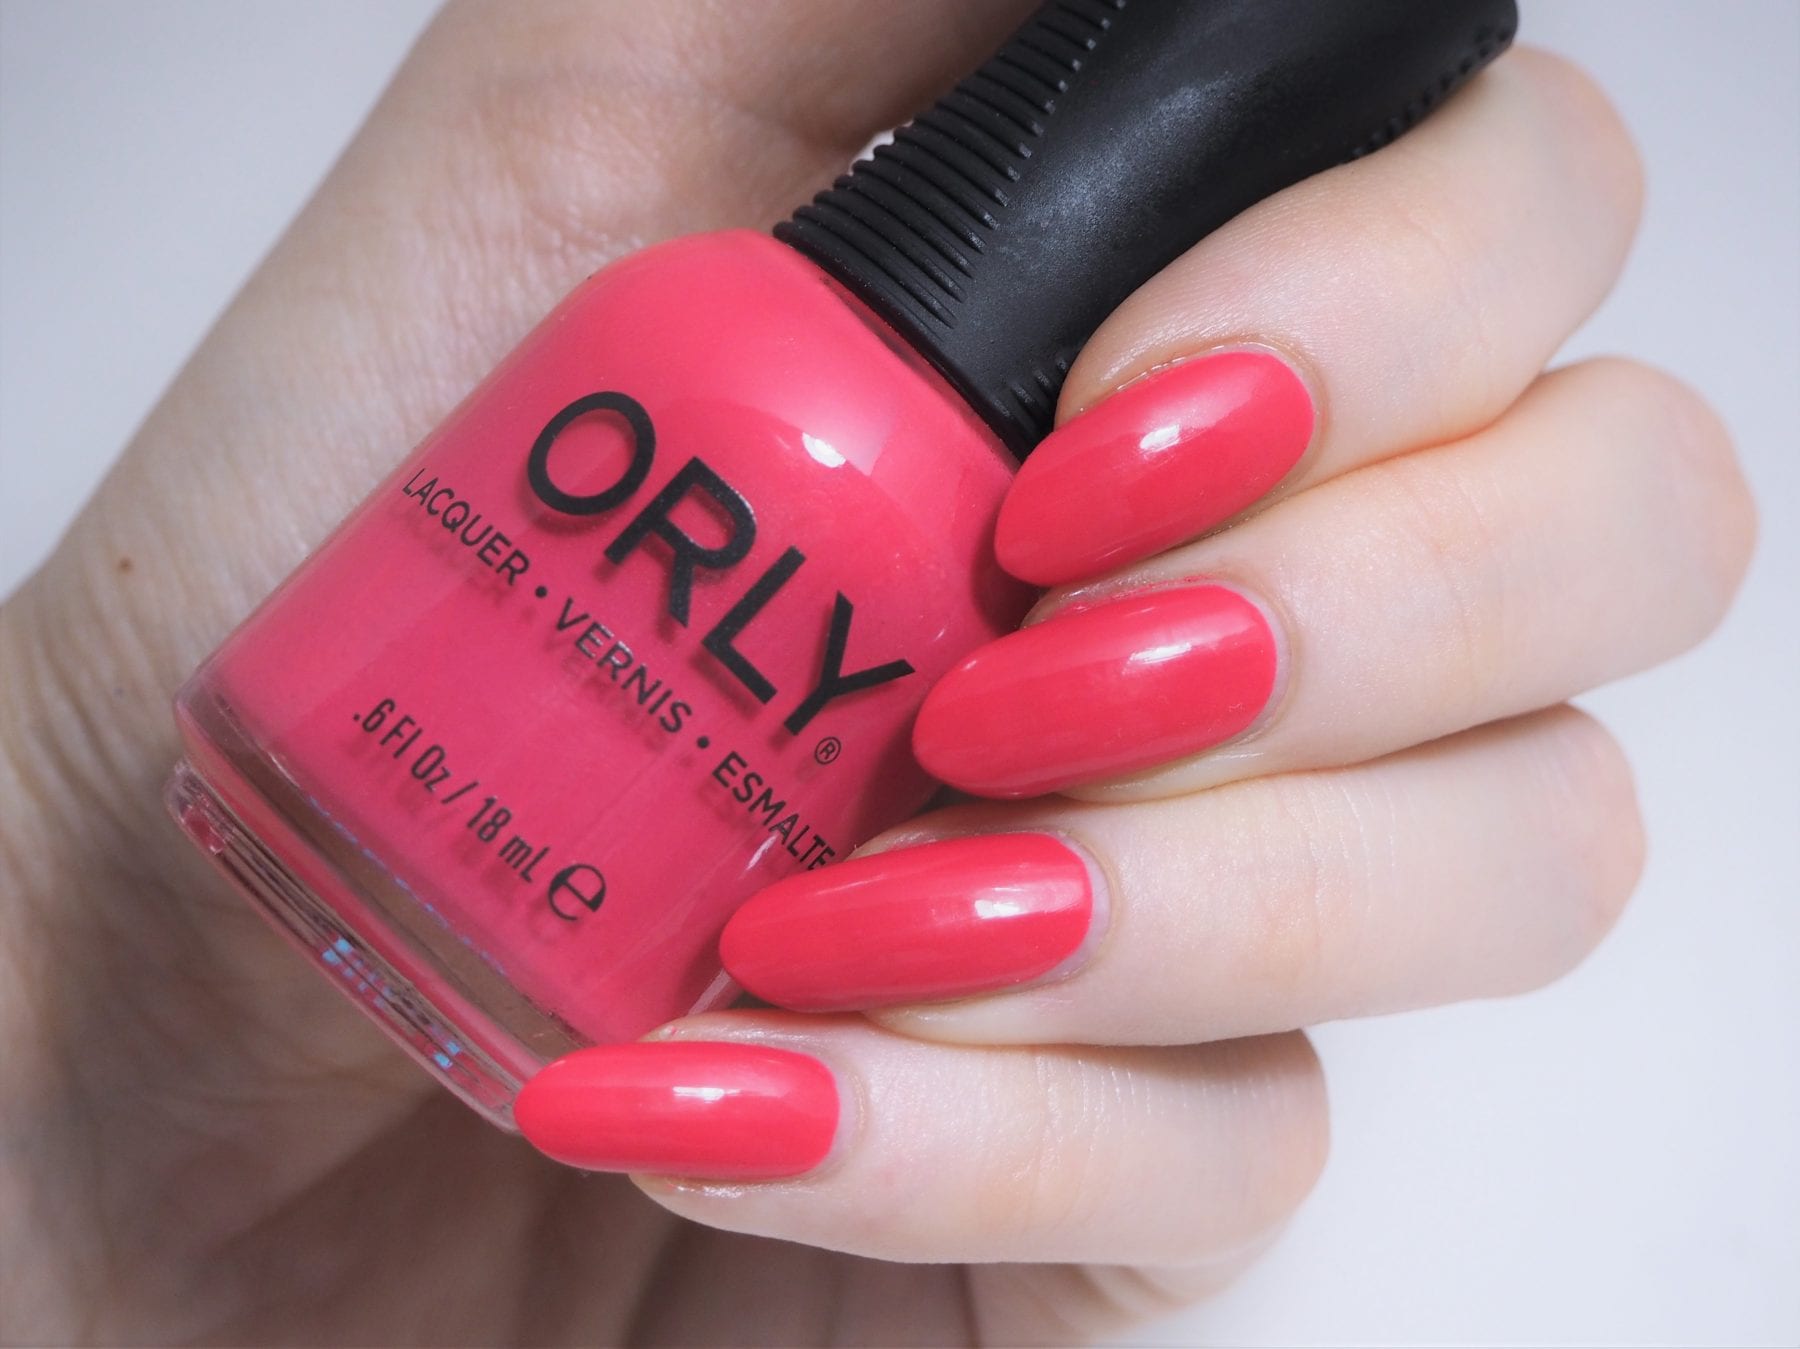 Orly Nail Lacquer in "Nude Rose" - wide 6